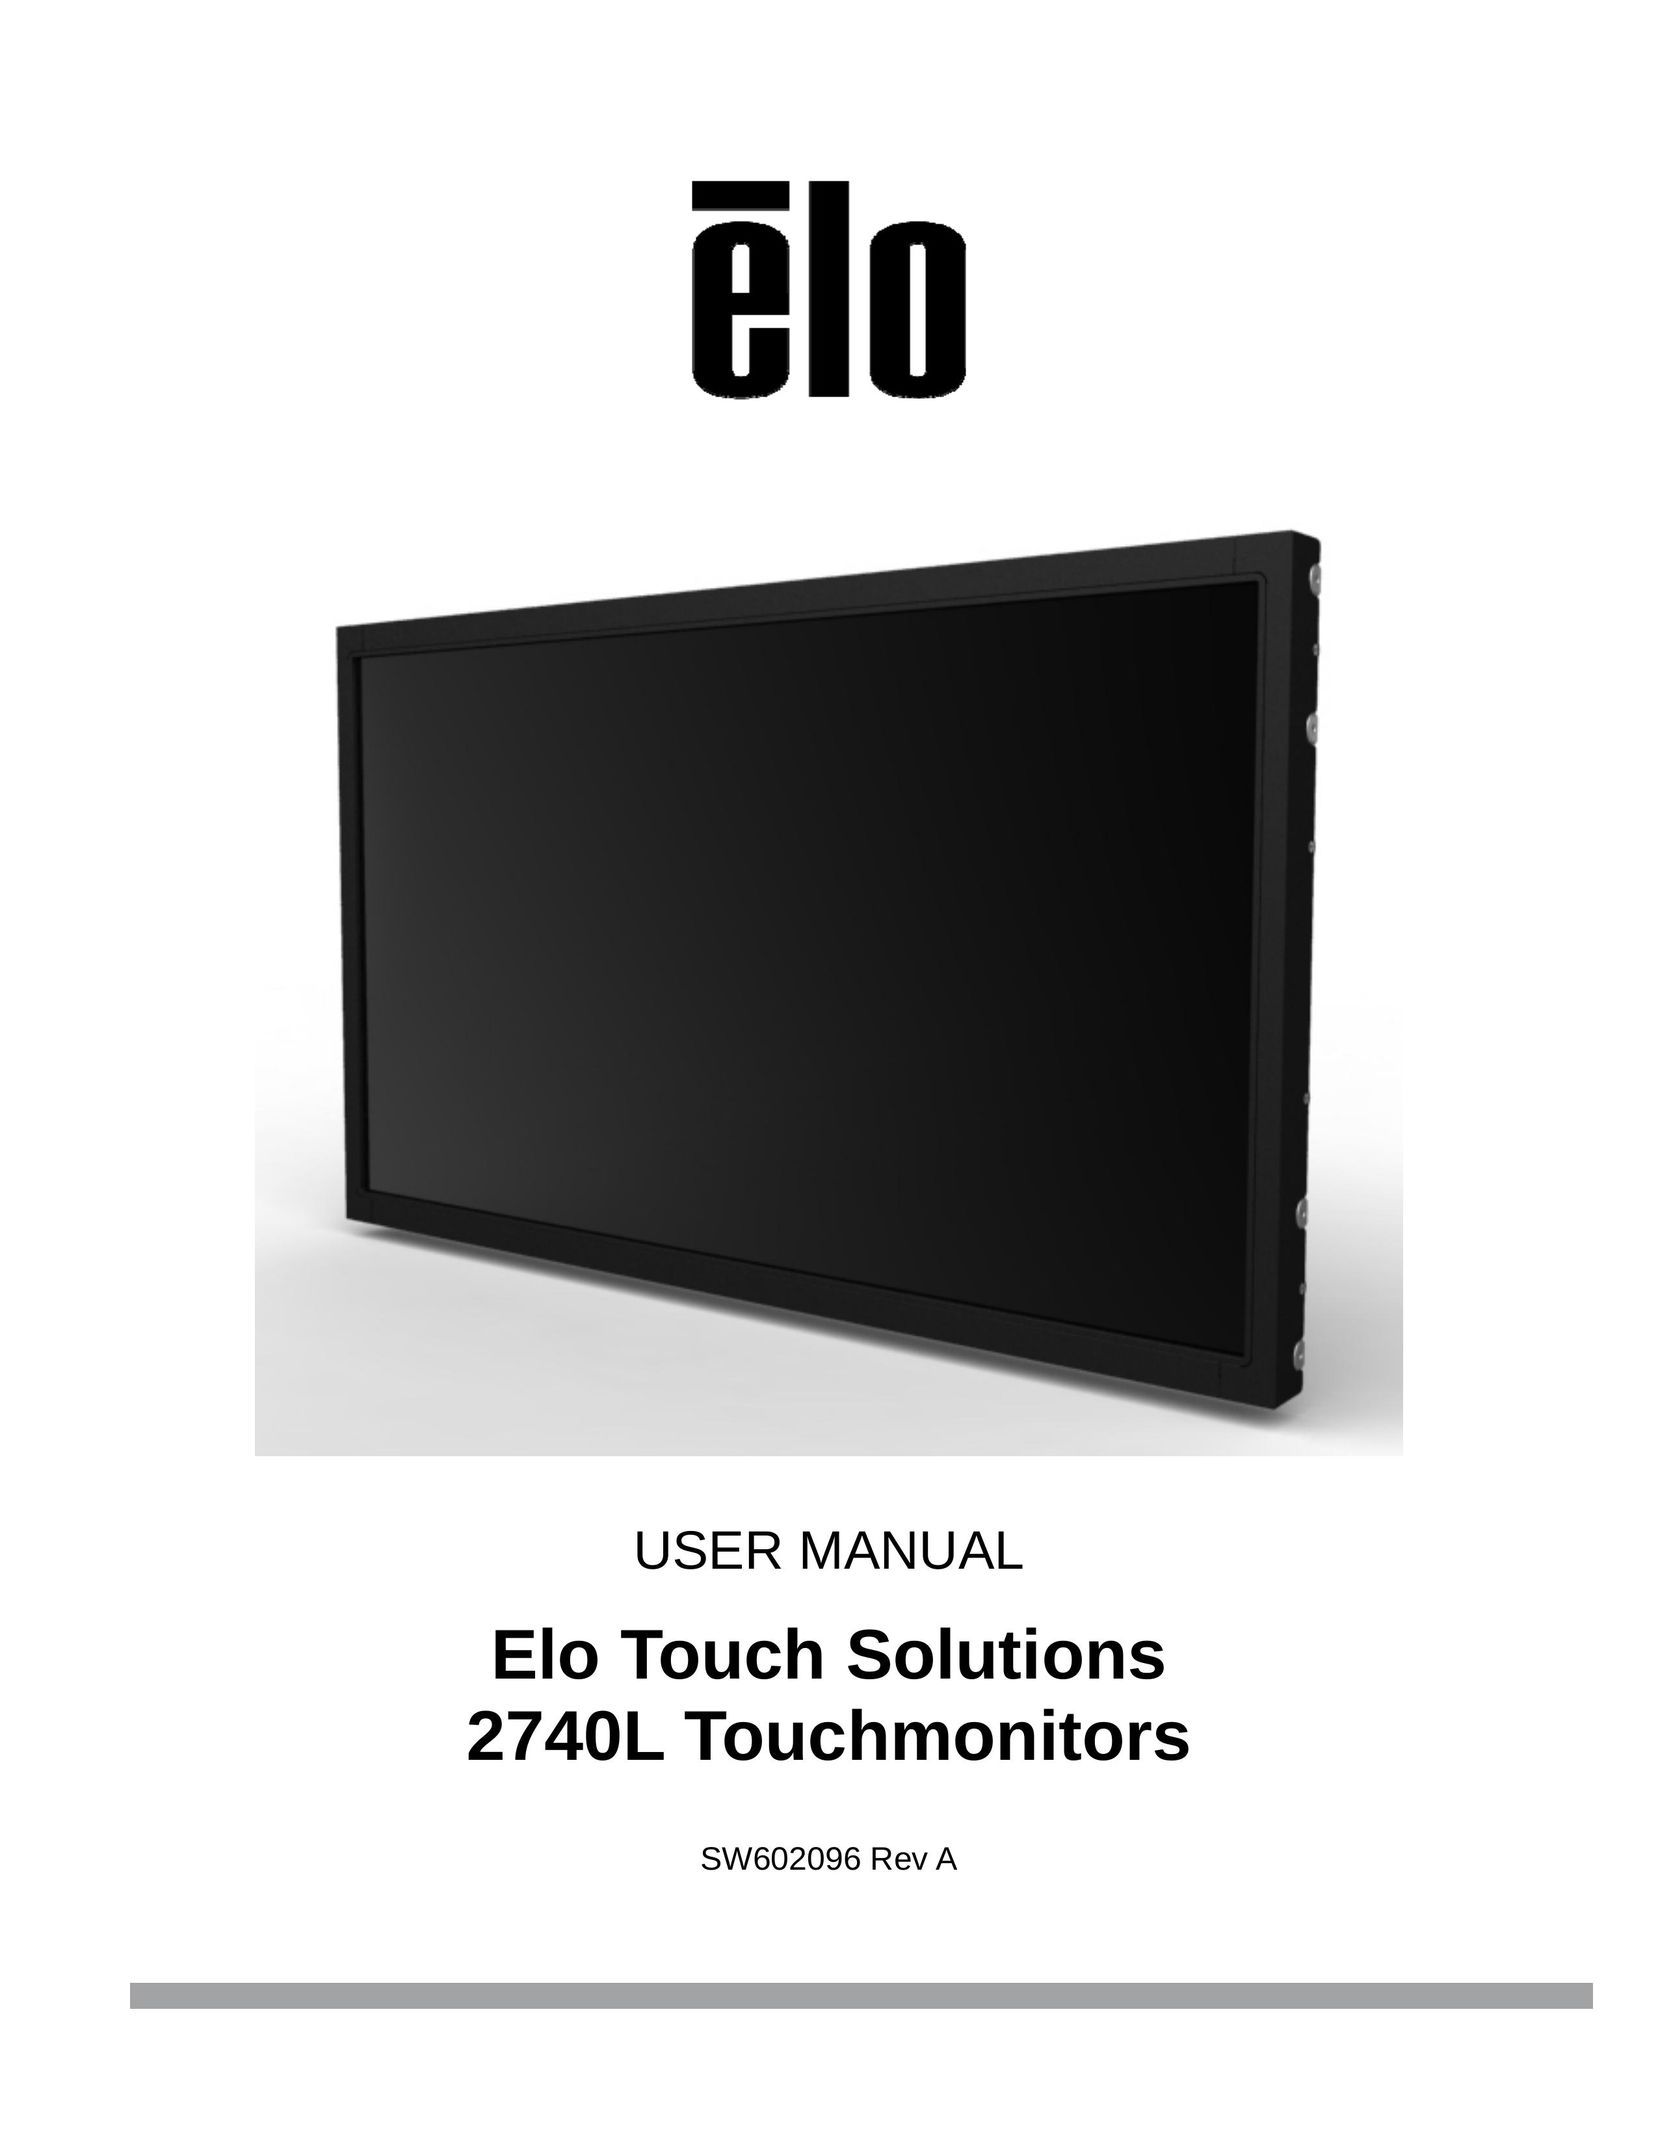 Elo TouchSystems 2740L Car Video System User Manual